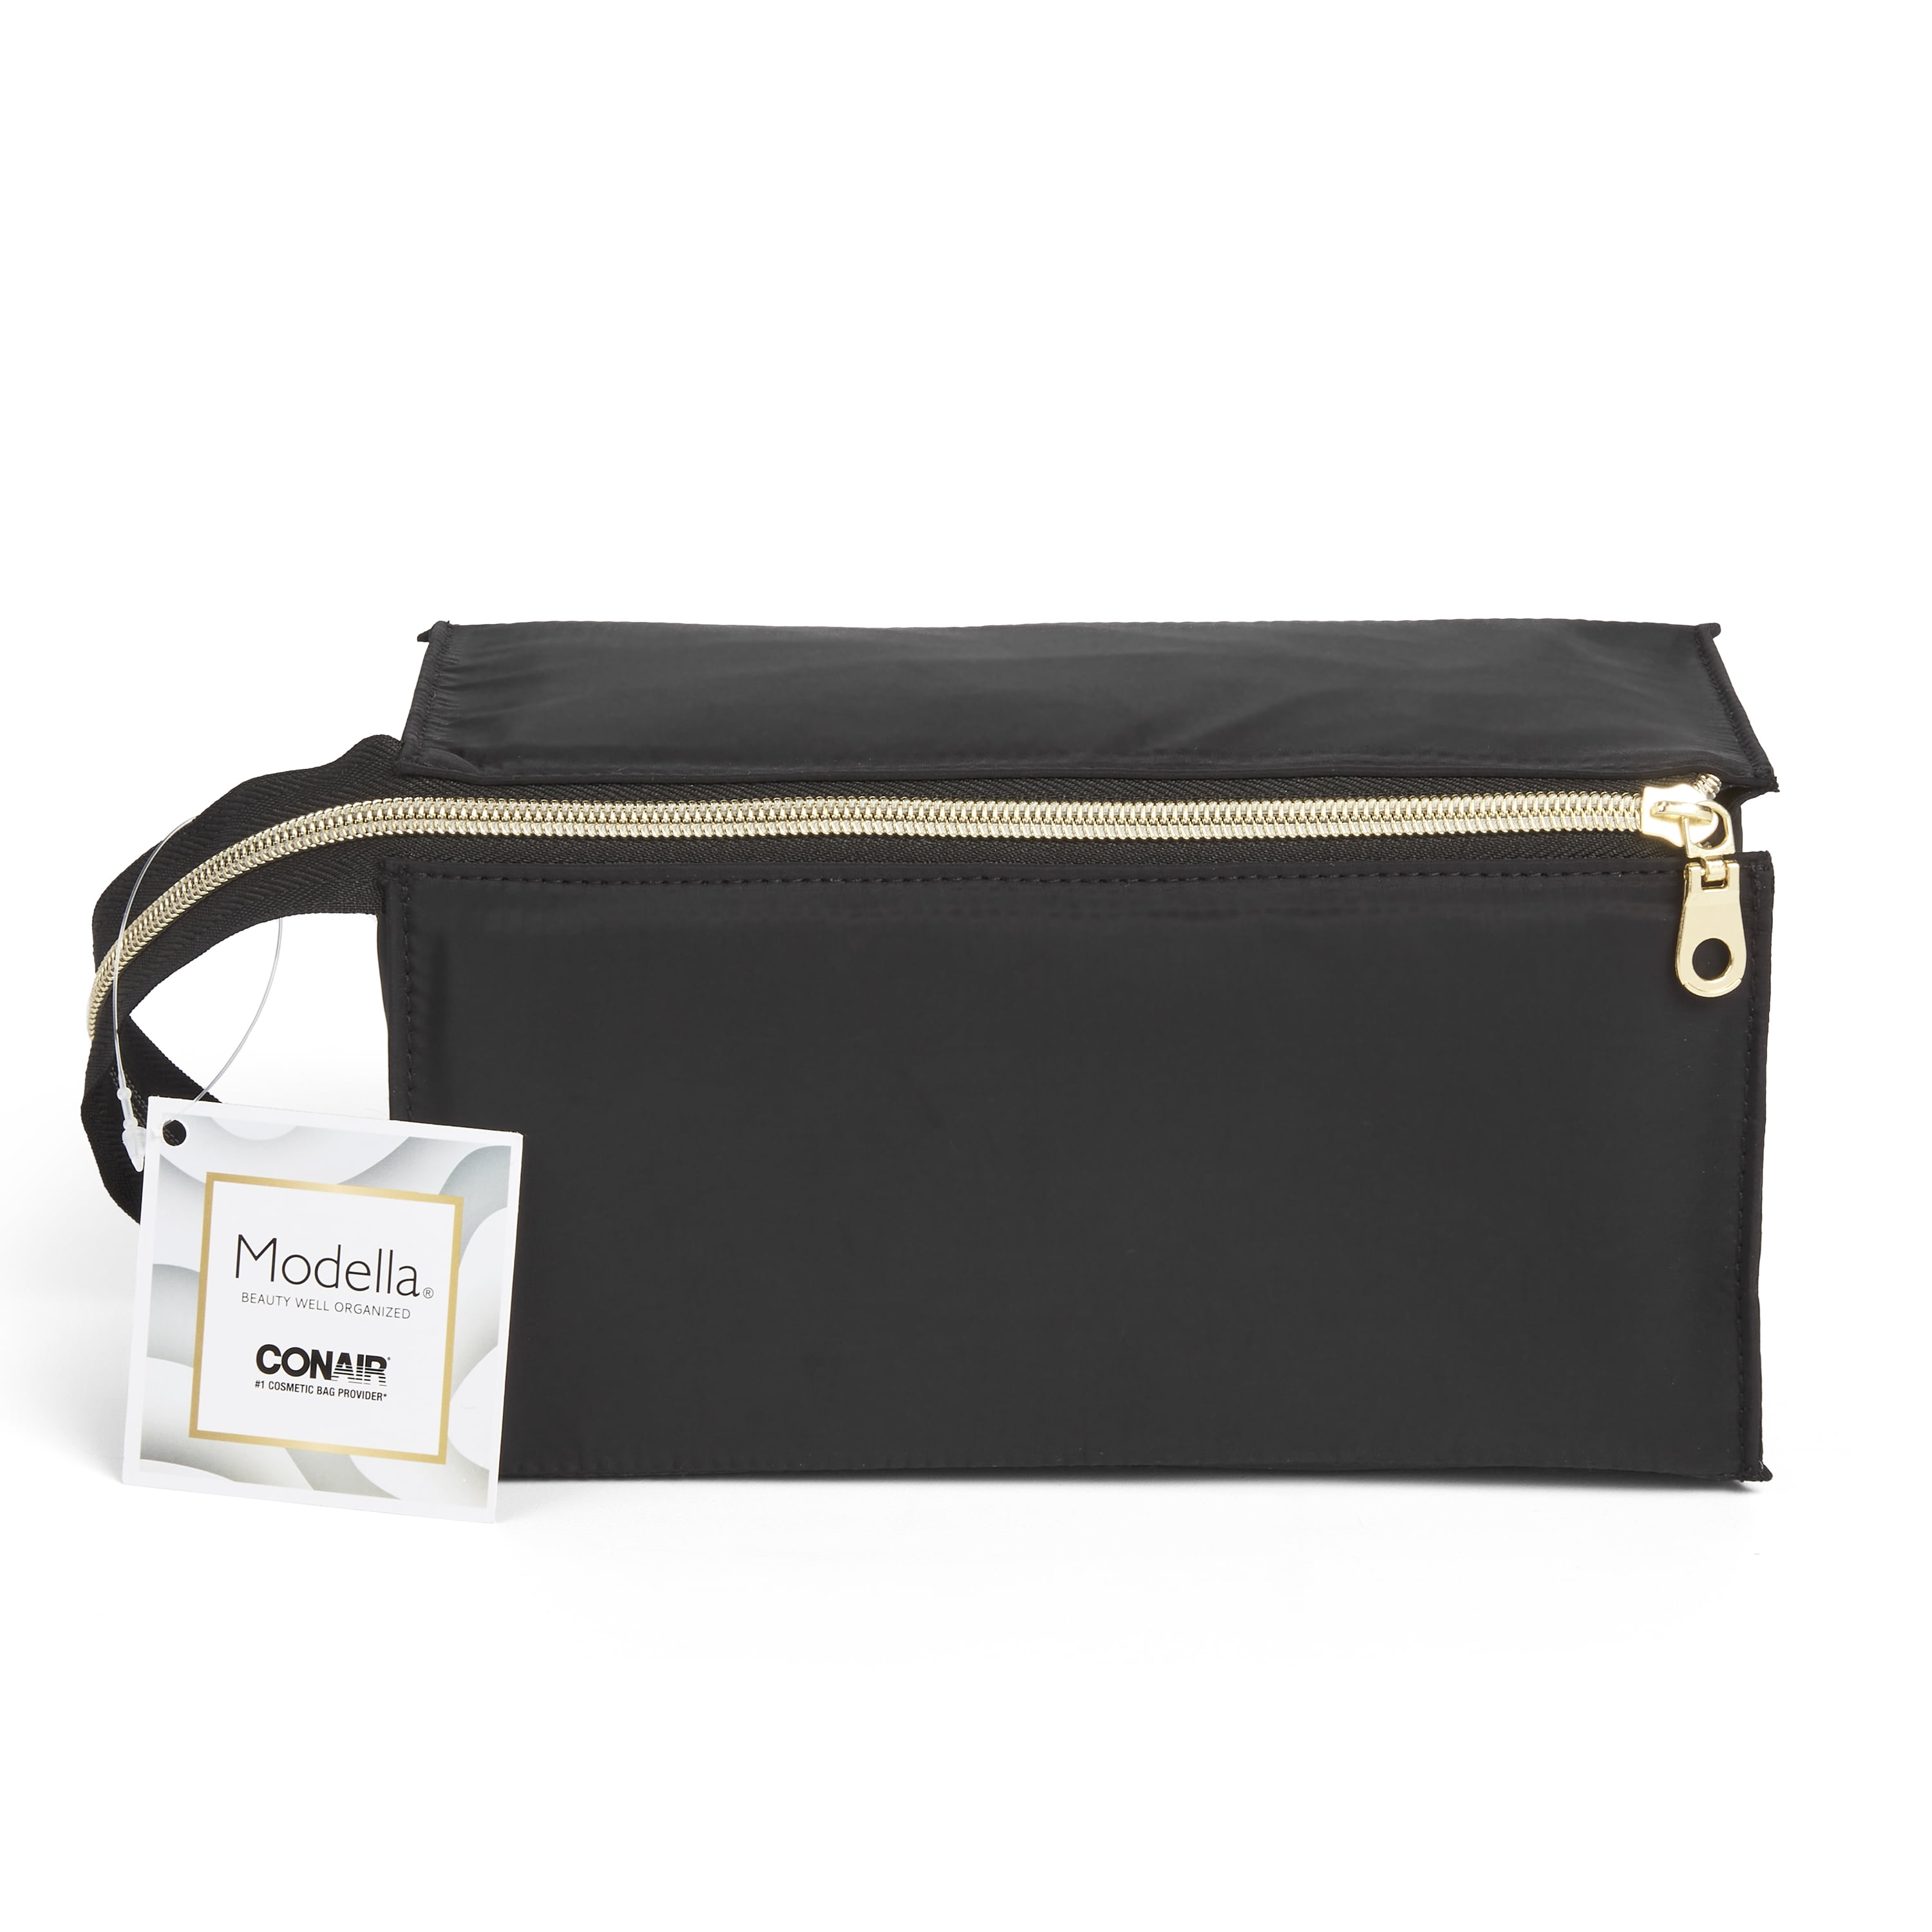 Modella Lay Flat Travel Cosmetic Bag for Makeup & Accessories, Black with Gold Zipper